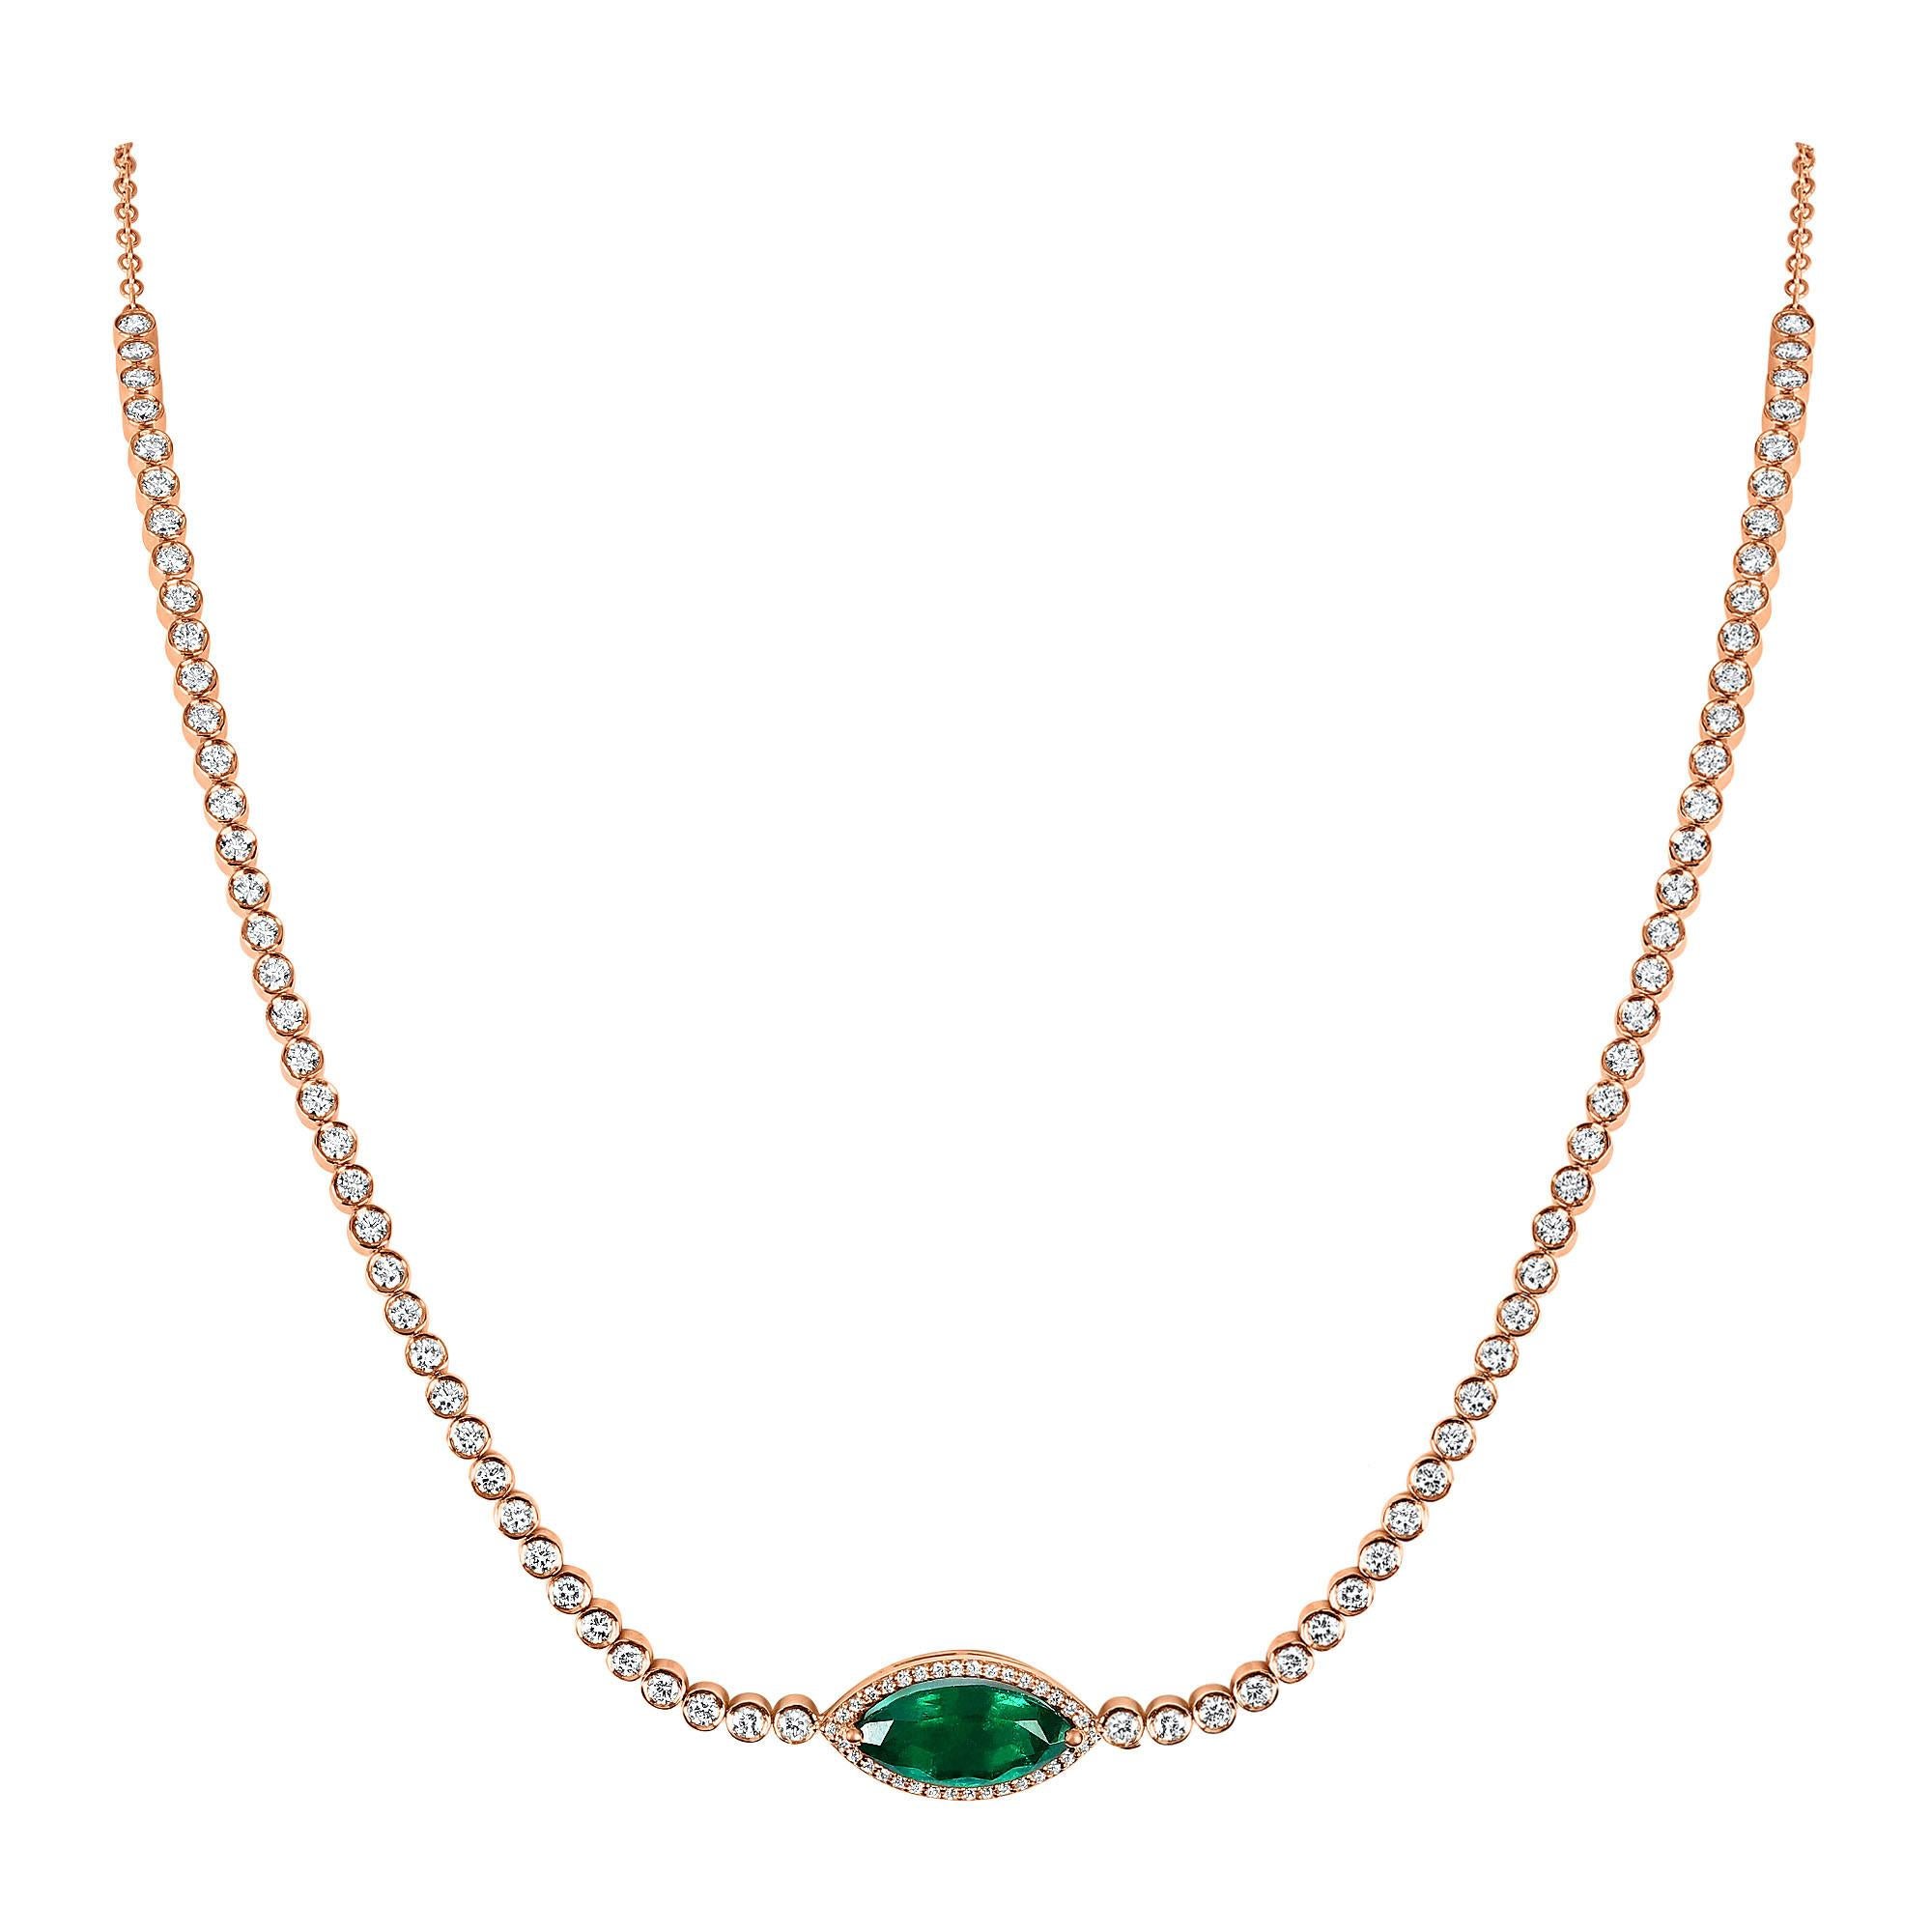 Fabulous 4.03 carat marquise-shaped emerald and 3.50 carat diamonds set in rose gold.

